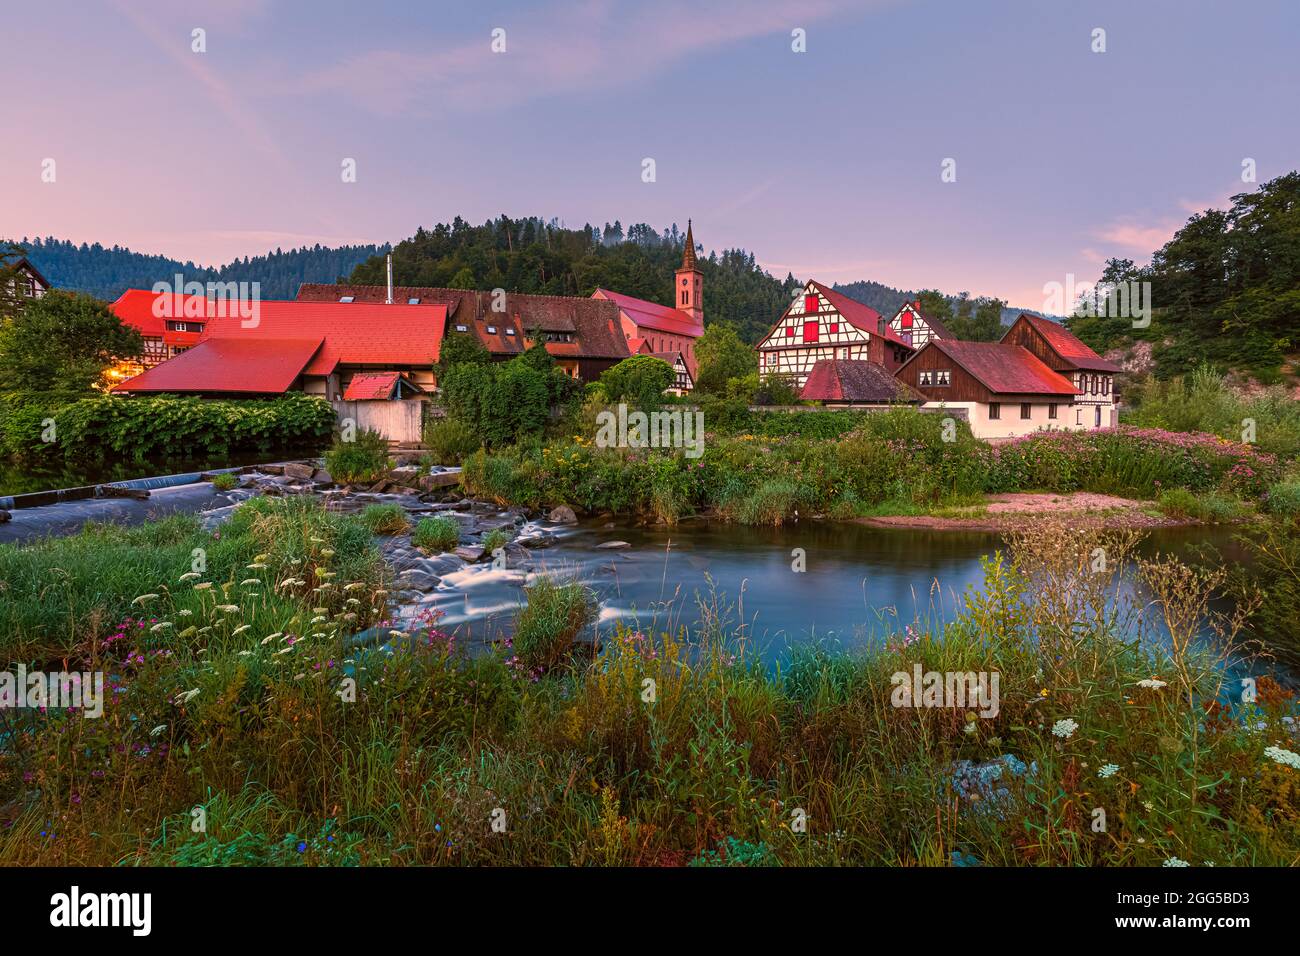 A summer sunrise with the Half-Timbered Houses in Schiltach, a town in the district of Rottweil, in Baden-Württemberg, Germany. It is situated in the Stock Photo